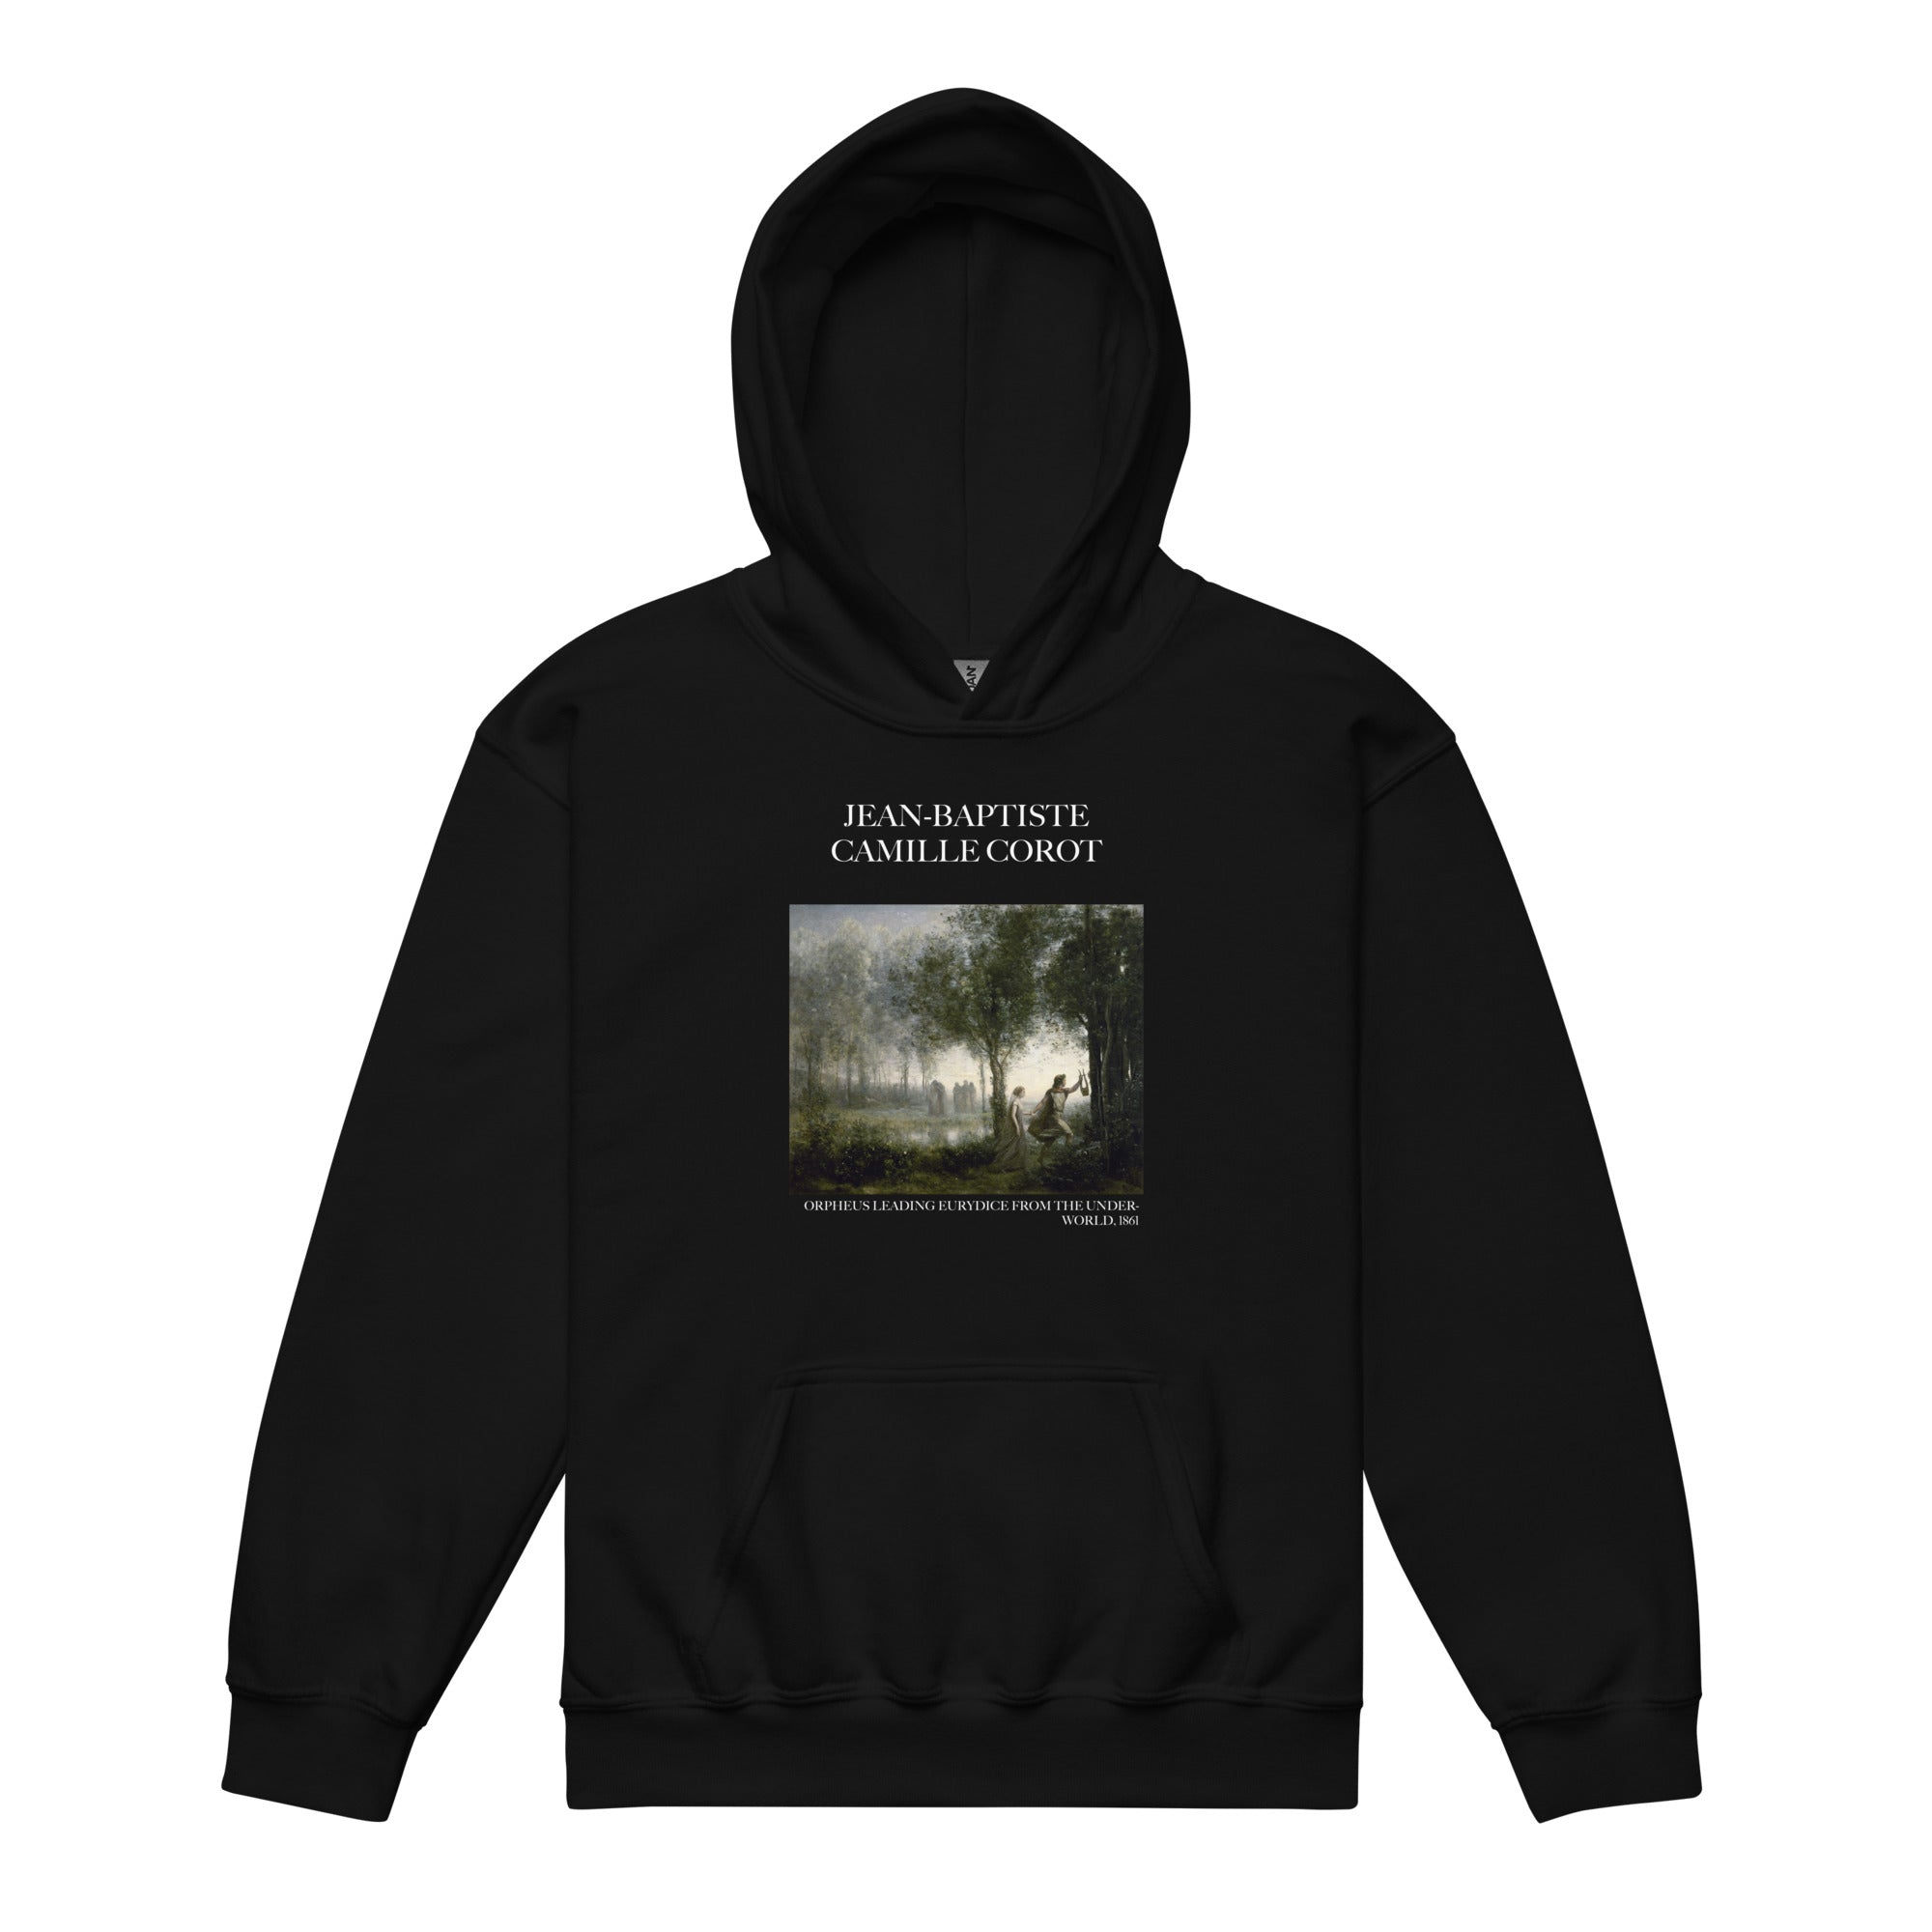 Jean-Baptiste Camille Corot 'Orpheus Leading Eurydice from the Underworld' Famous Painting Hoodie | Premium Youth Art Hoodie